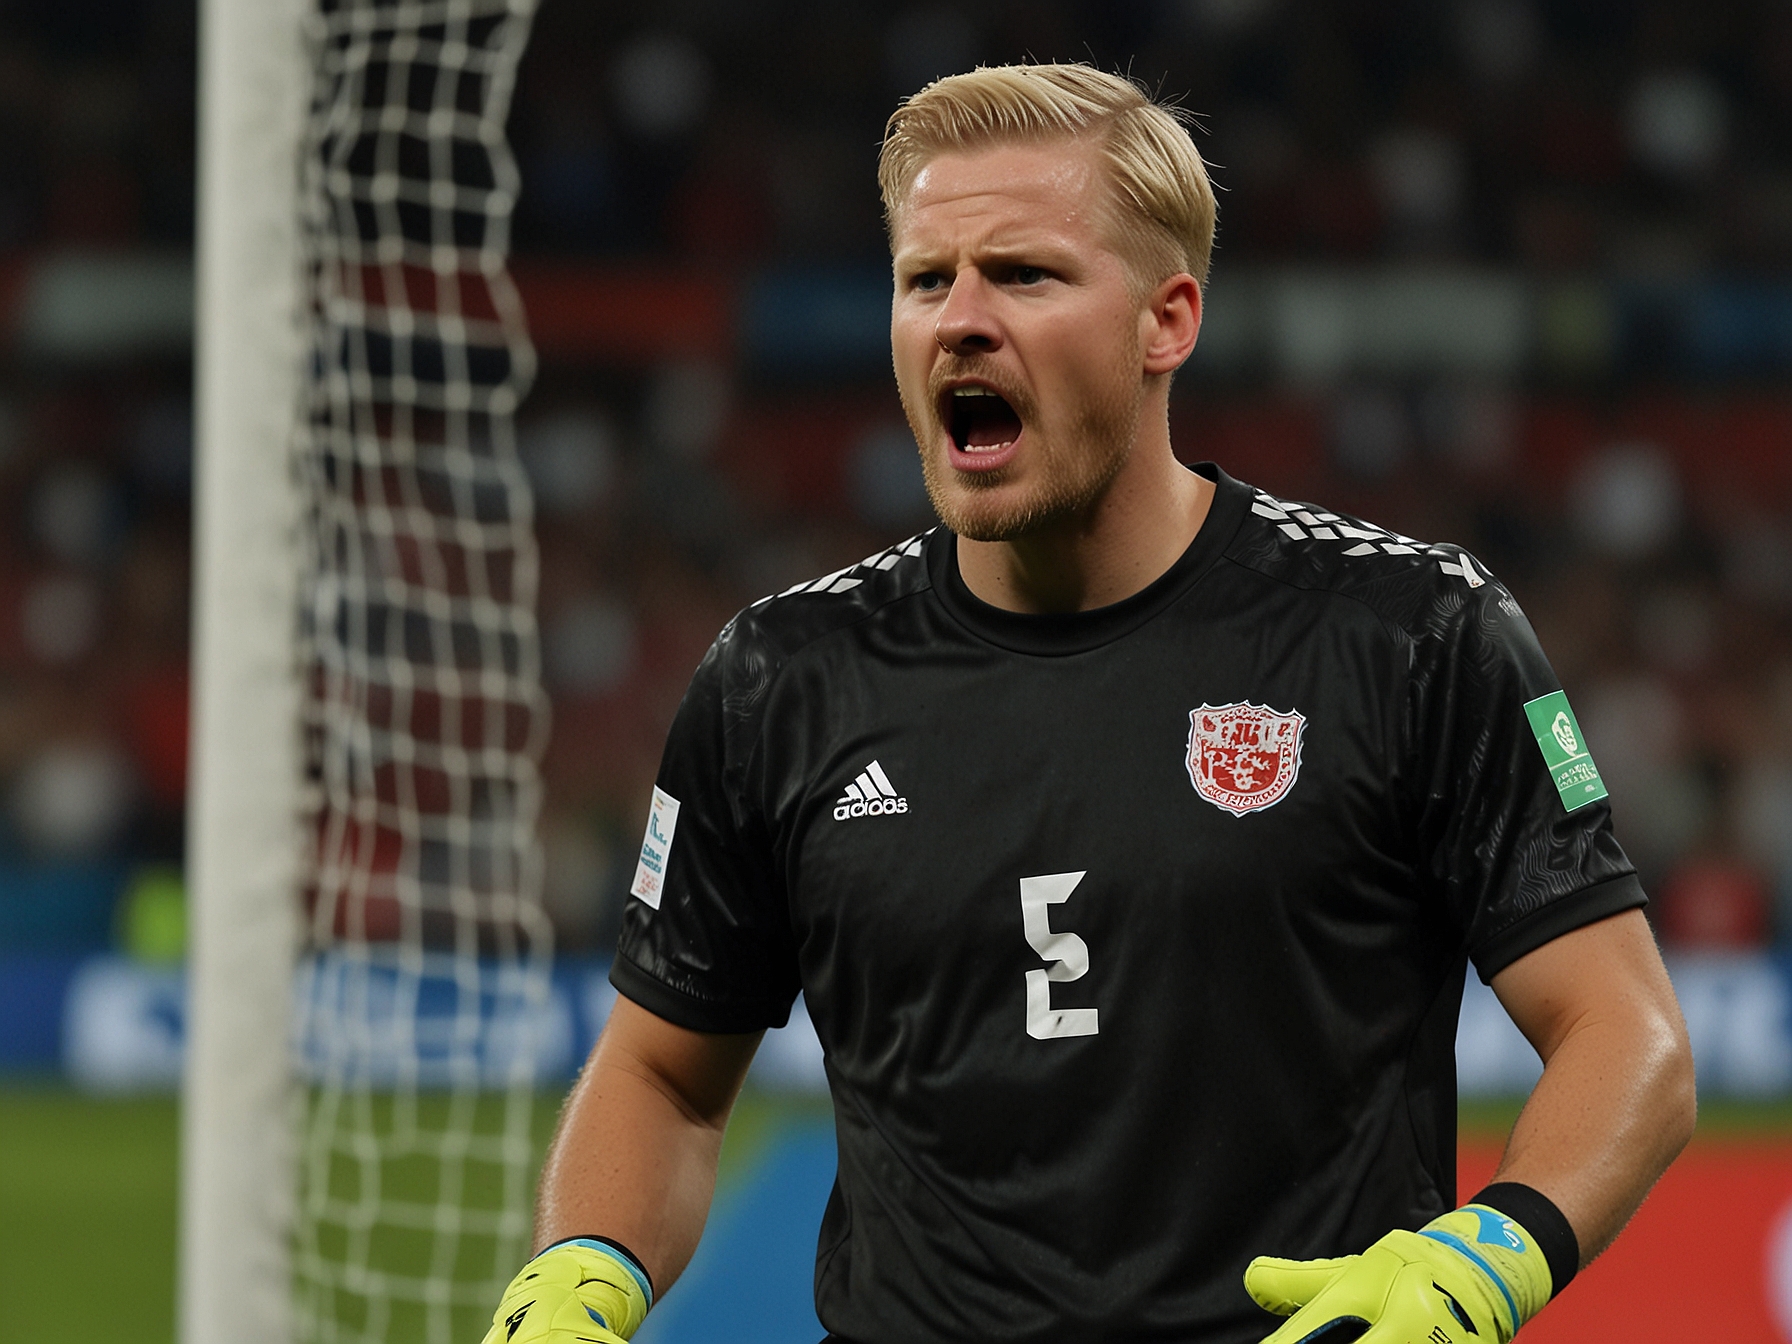 Denmark's goalkeeper, Kasper Schmeichel, during a tense moment in the Euro 2024 knockout game, visibly frustrated as he reacts to a controversial VAR decision on the field.